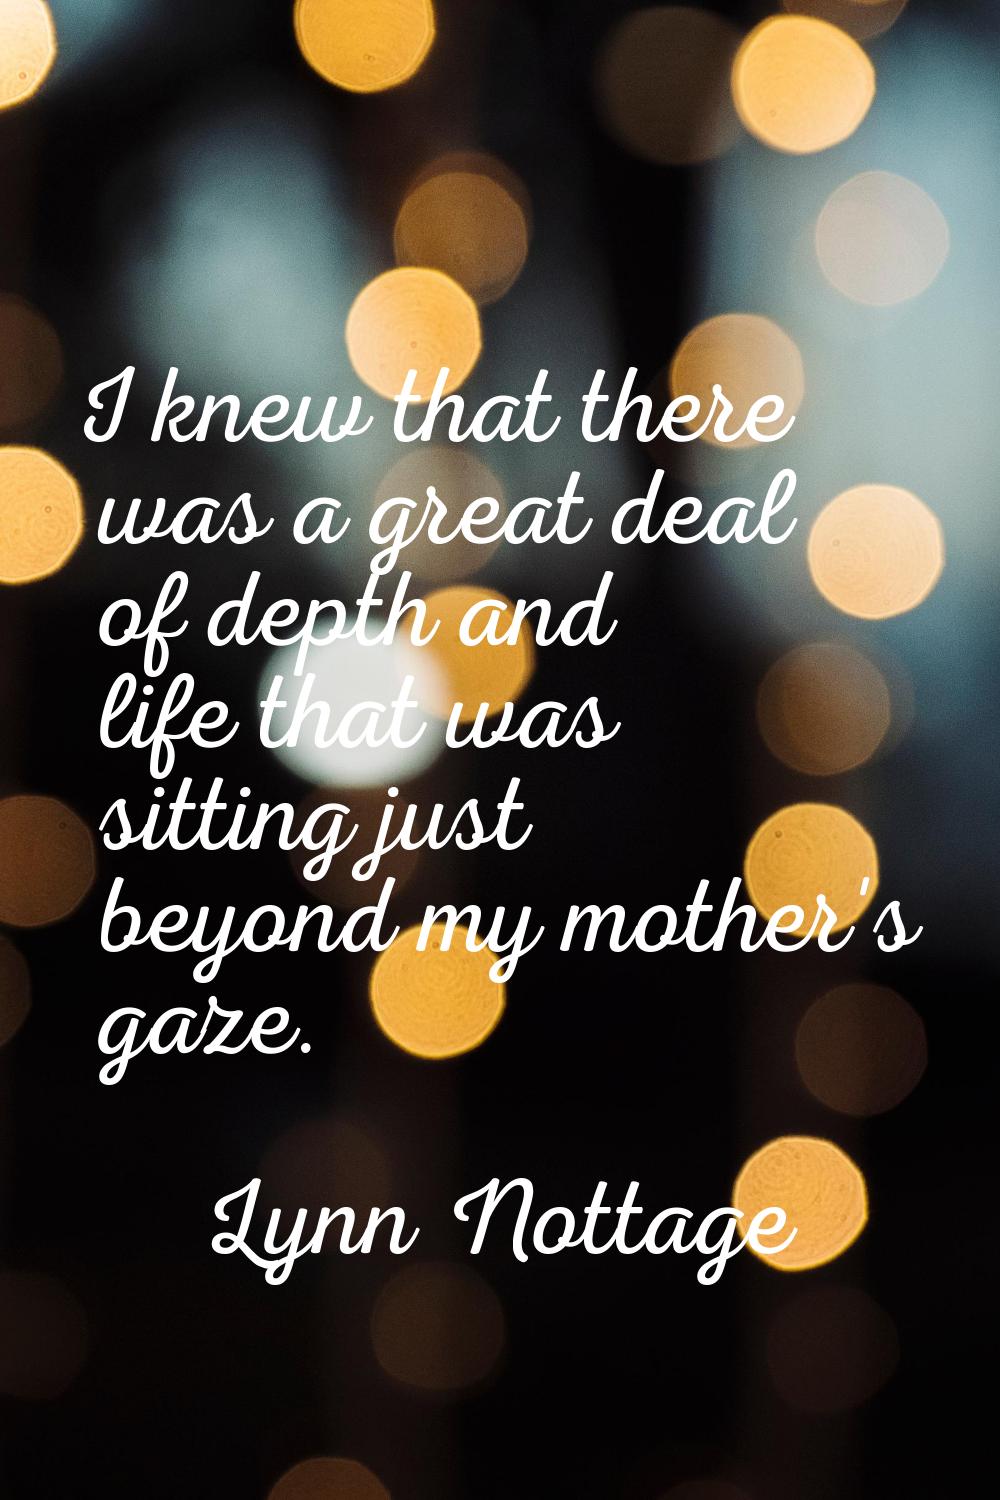 I knew that there was a great deal of depth and life that was sitting just beyond my mother's gaze.